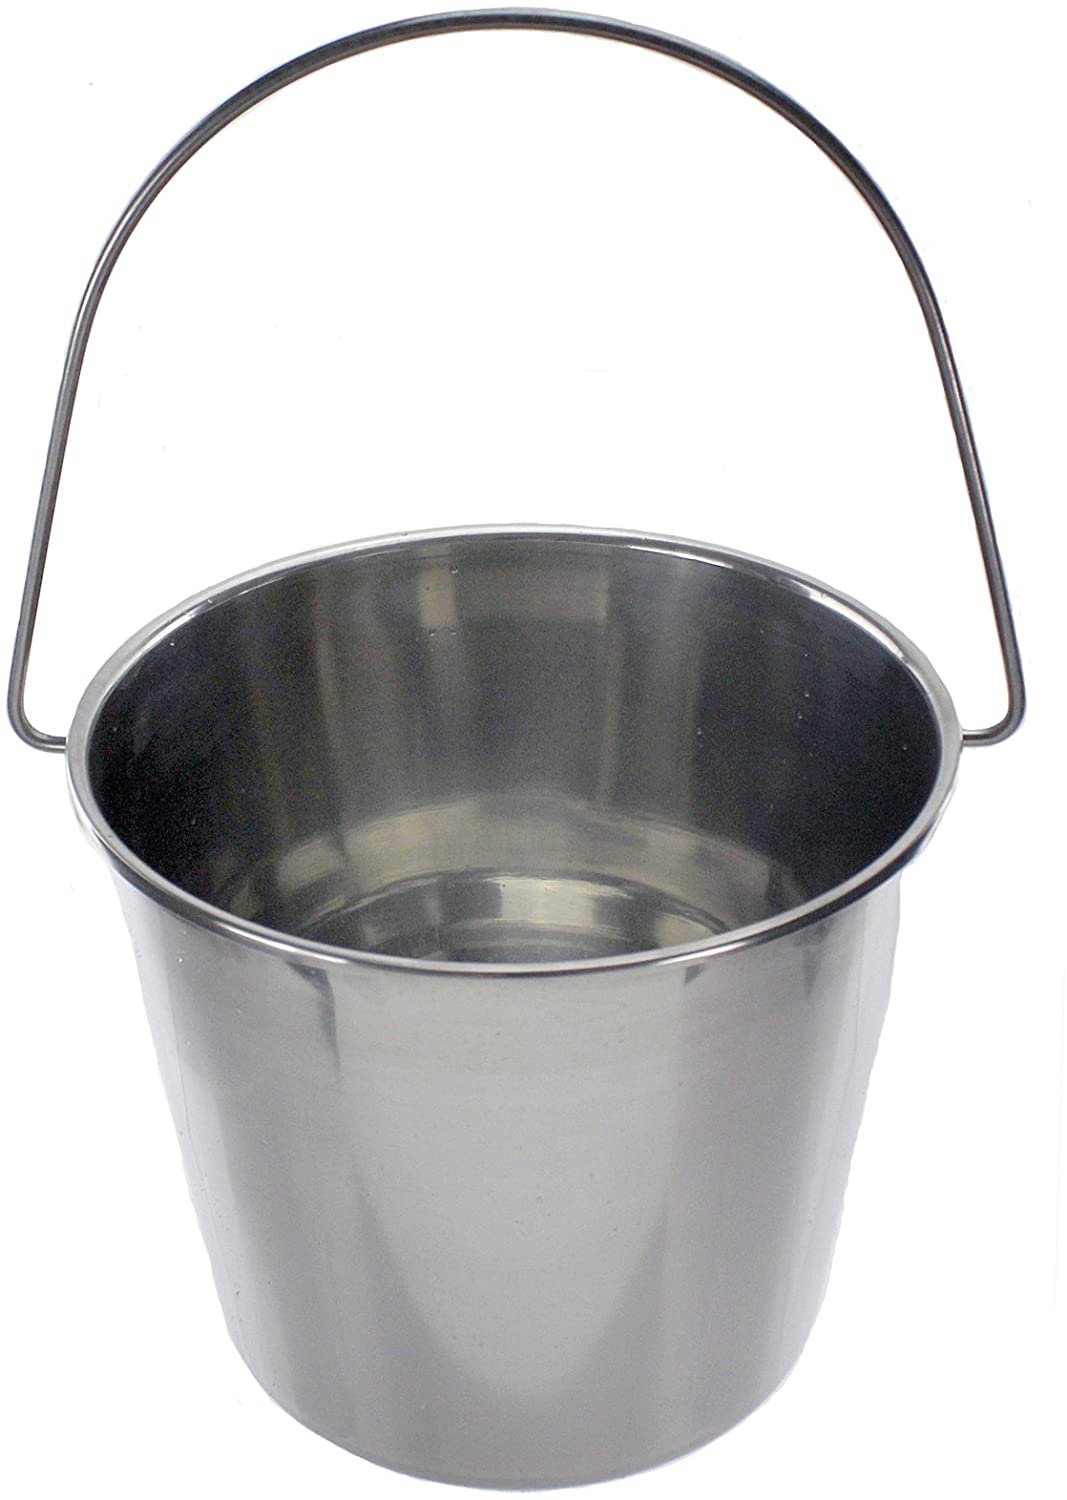 12 Litre Stainless Steel Handled Pail Bucket (Silver, Set of 5 Buckets)